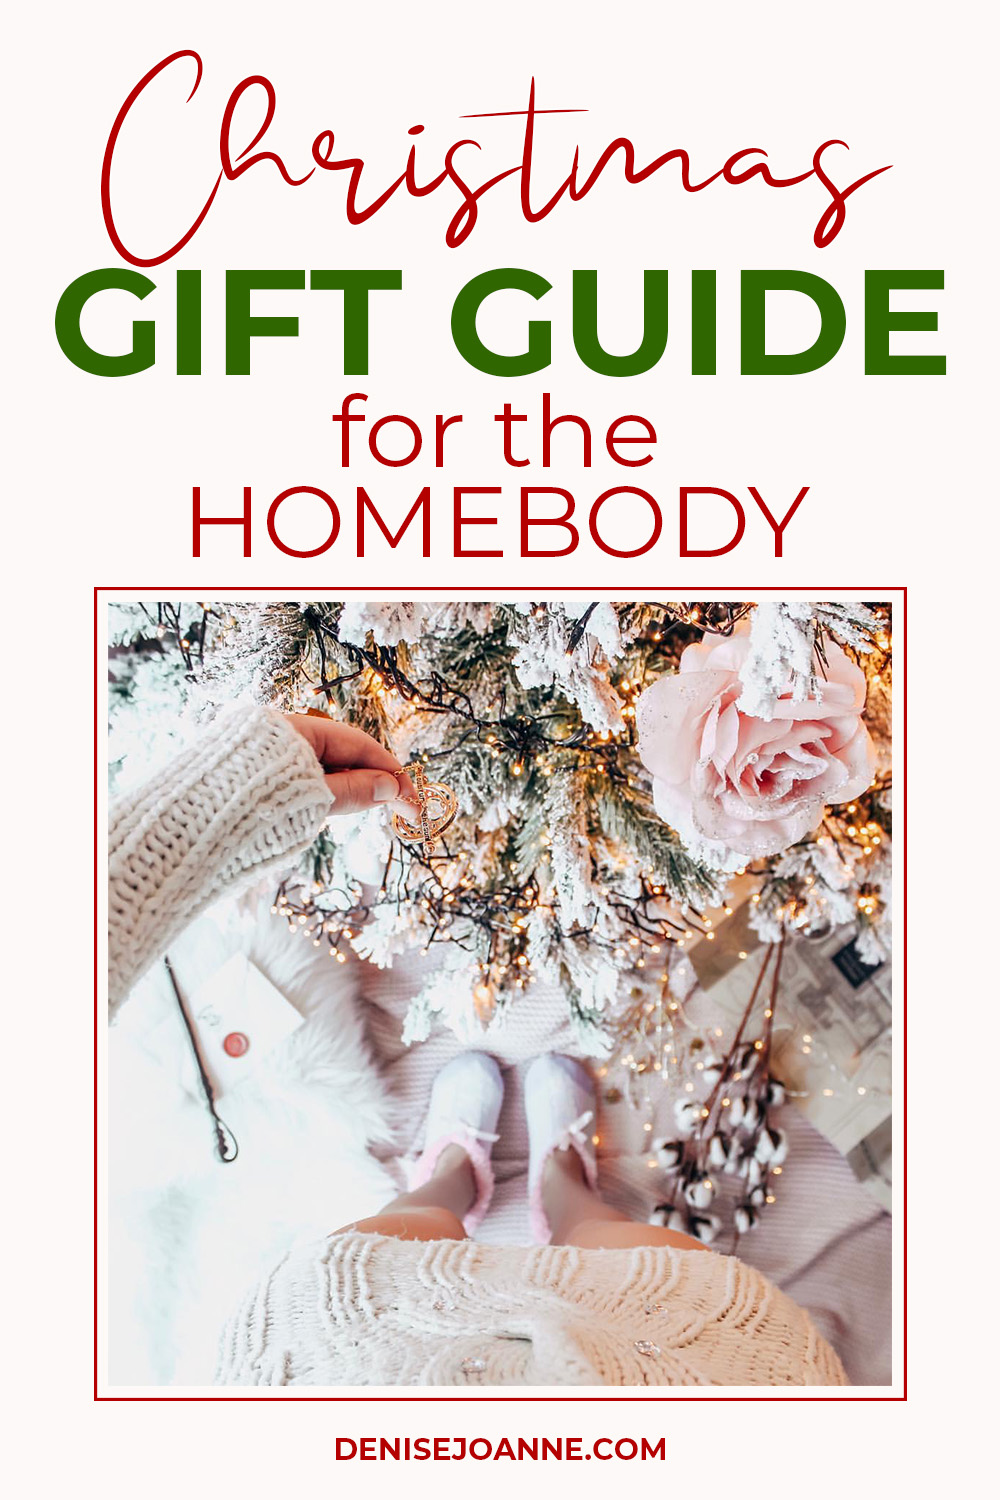 Picture of a Christmas tree with the writing "Christmas gift guide for the homebody"